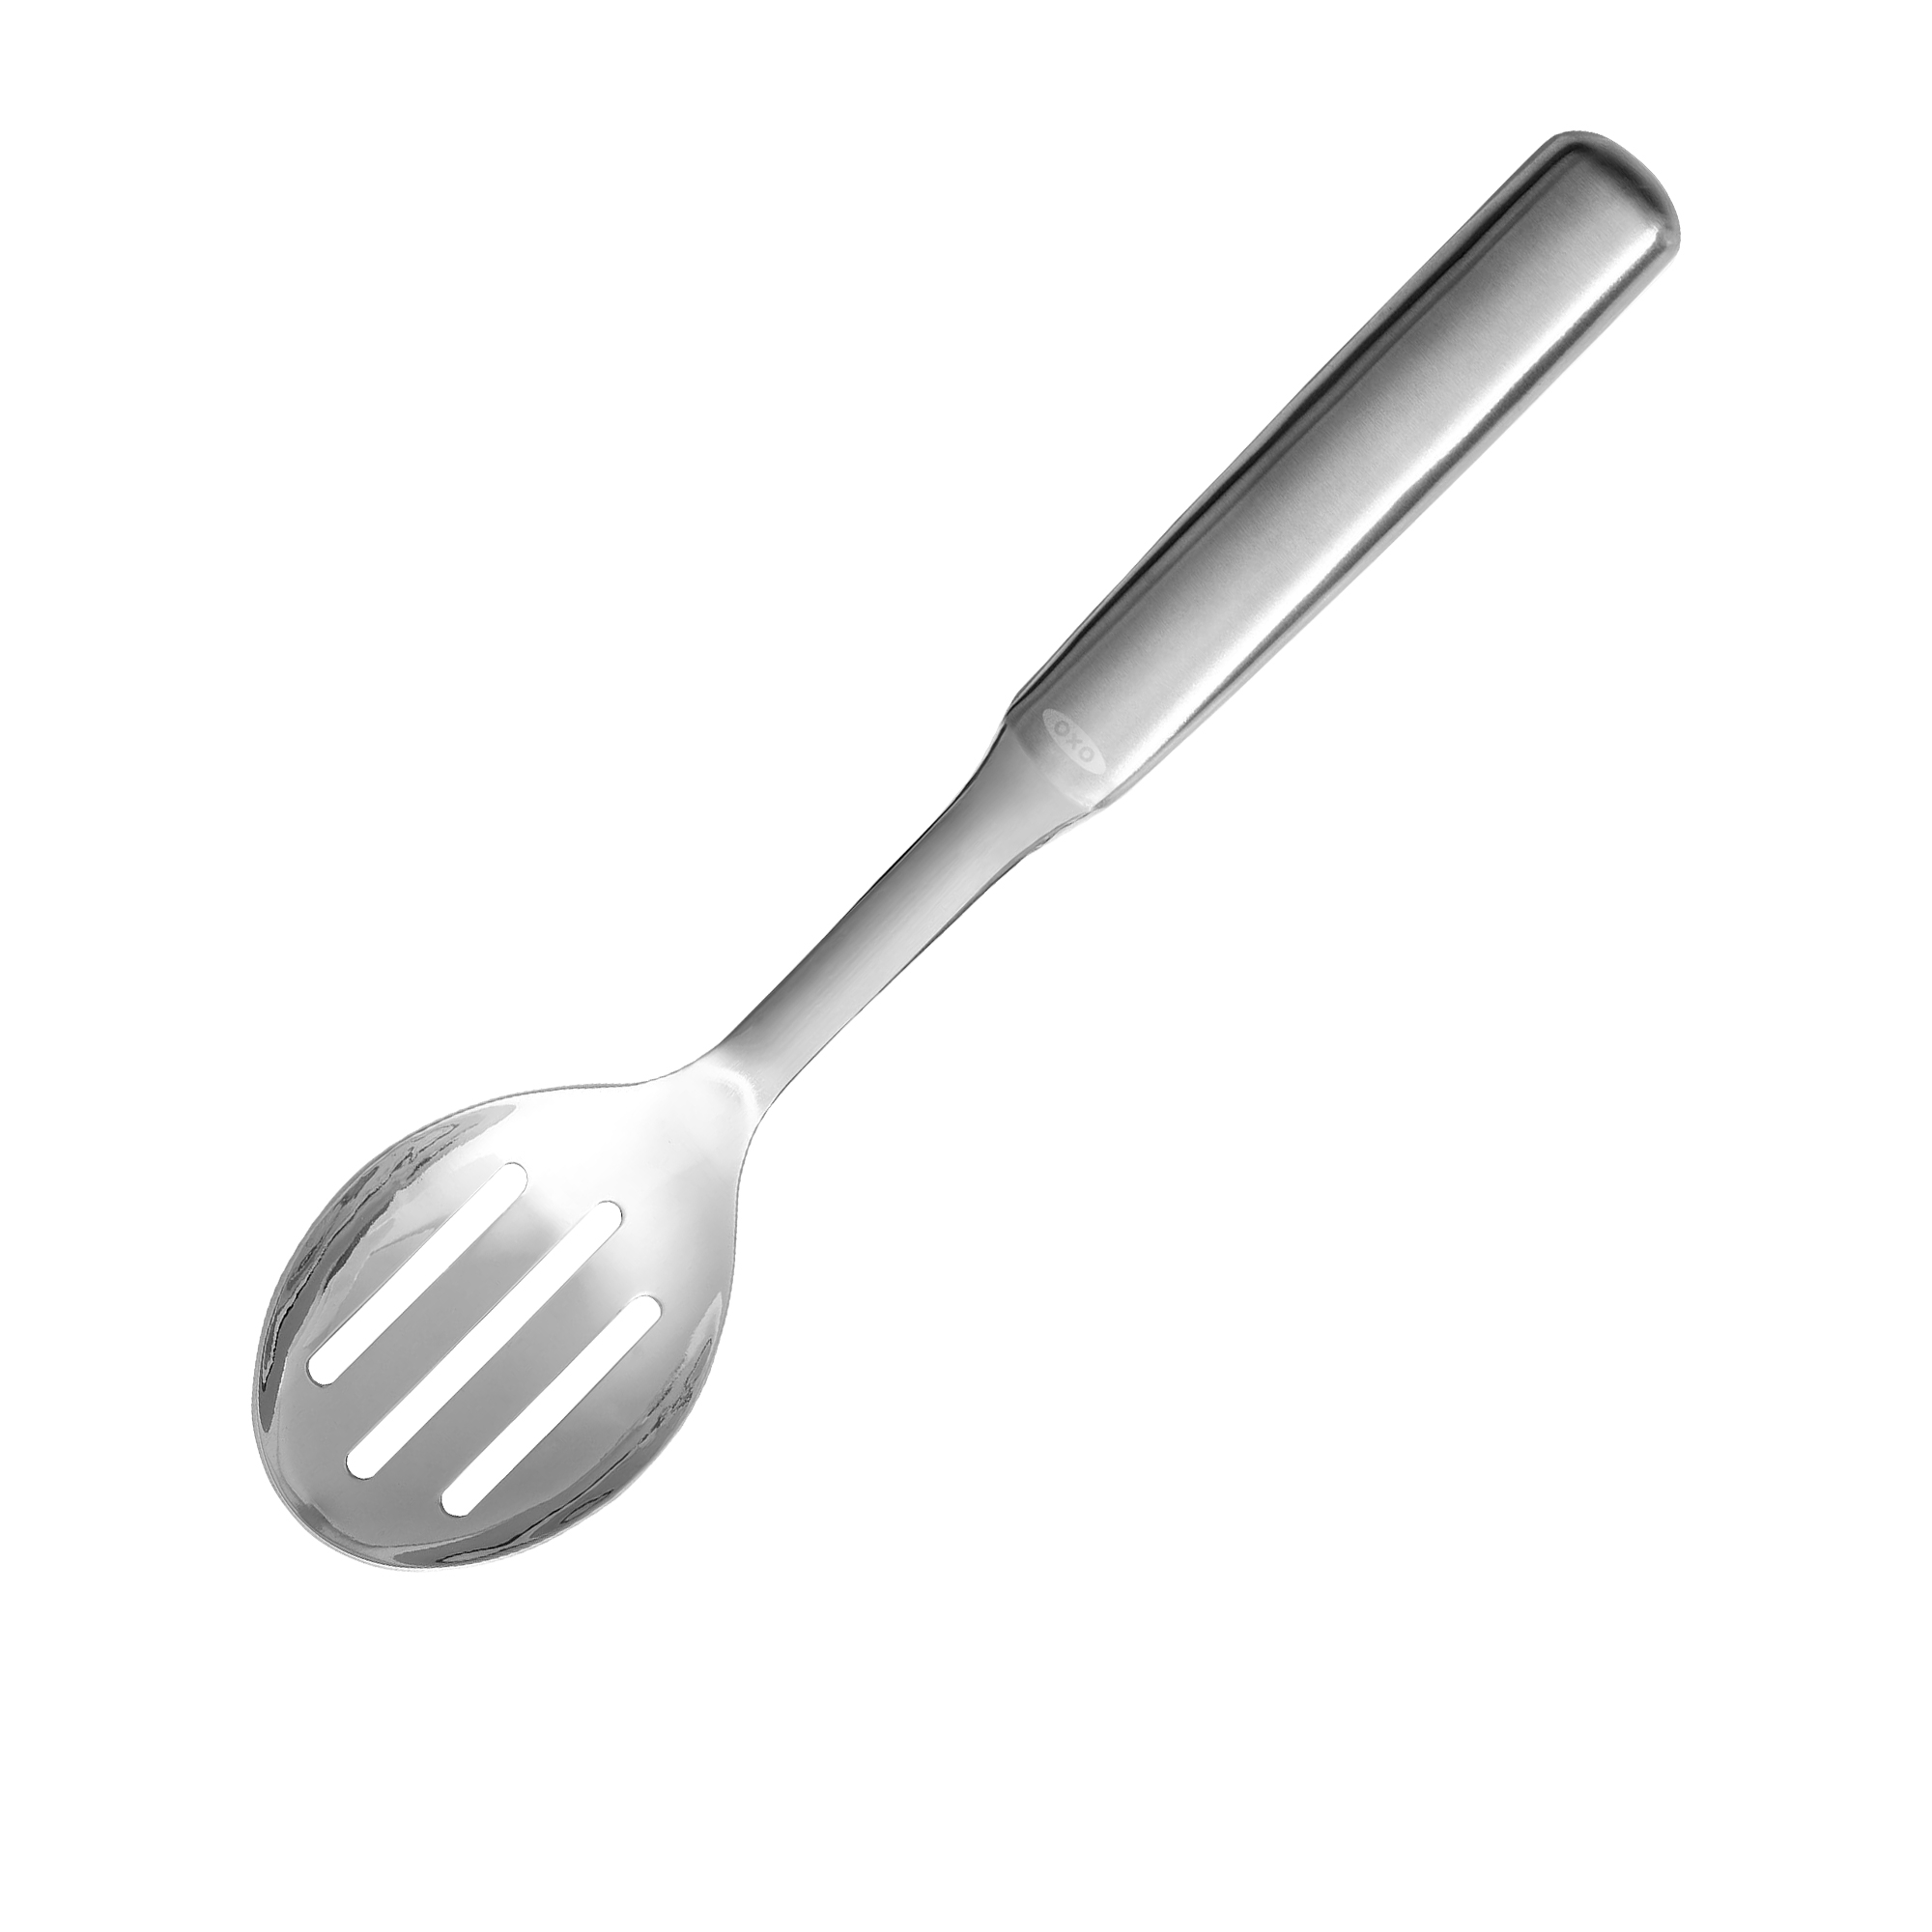 OXO SteeL Slotted Serving Spoon Image 1